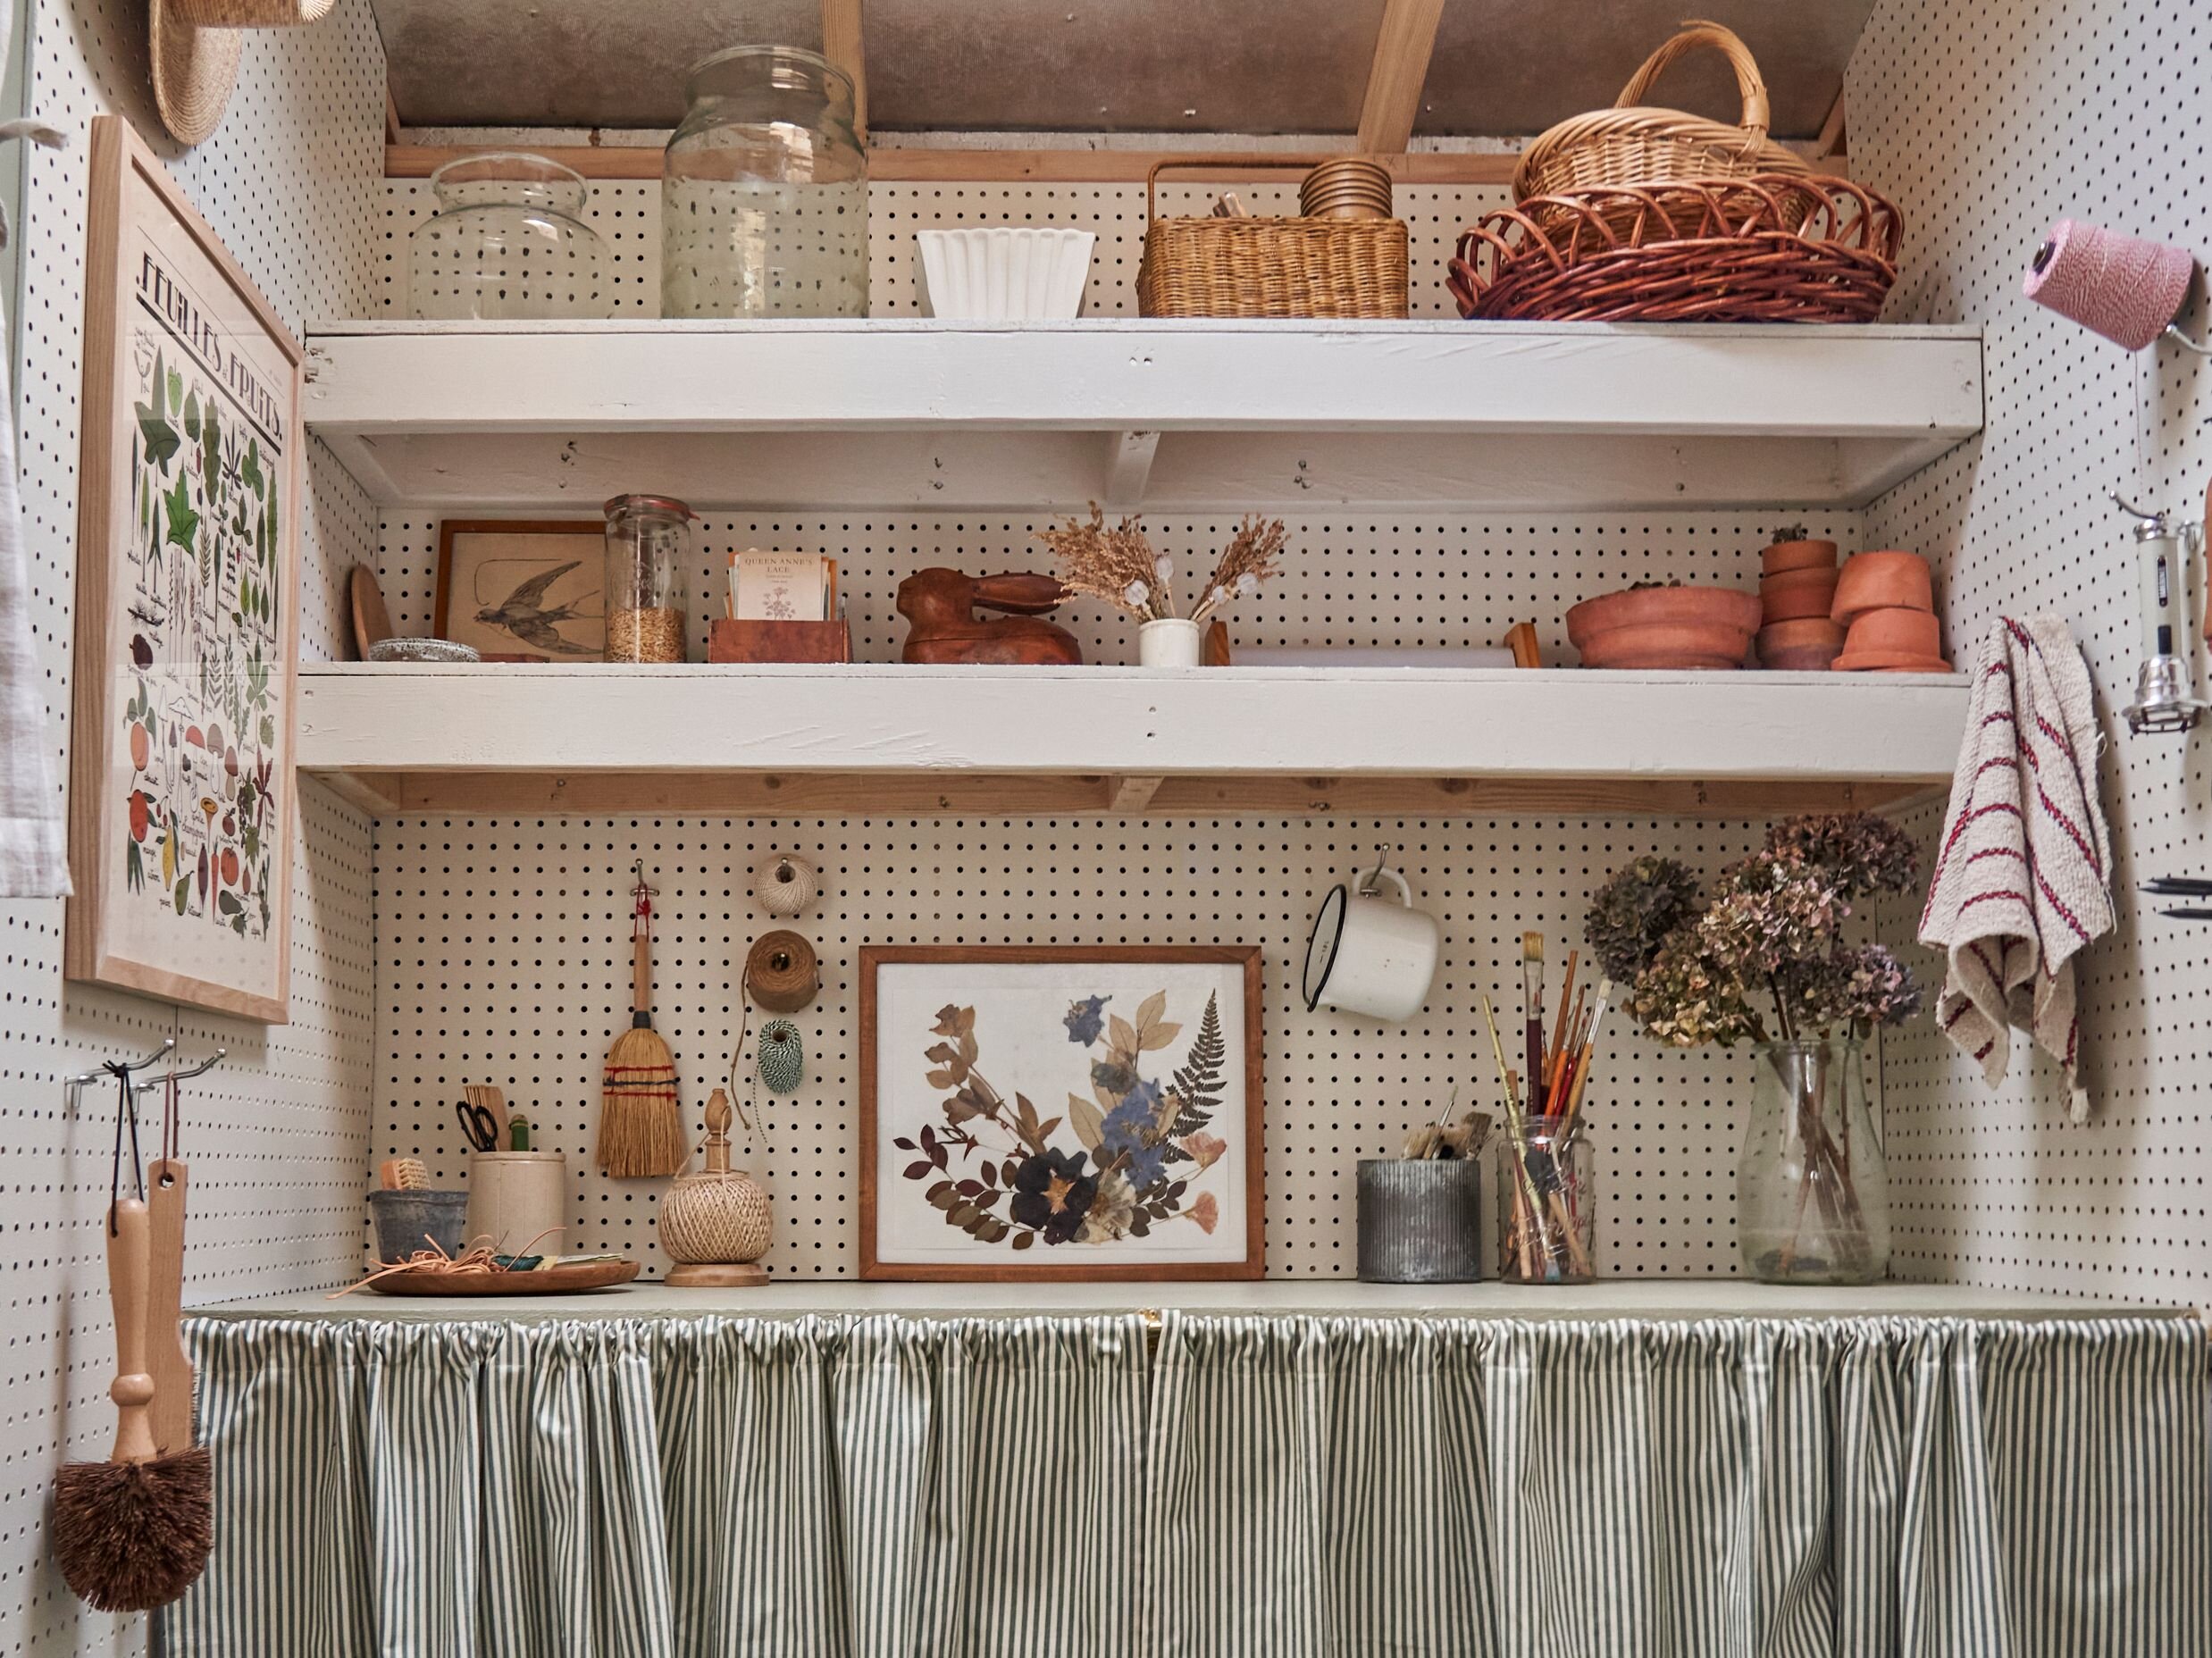 Interior view of small shed with vintage accessories